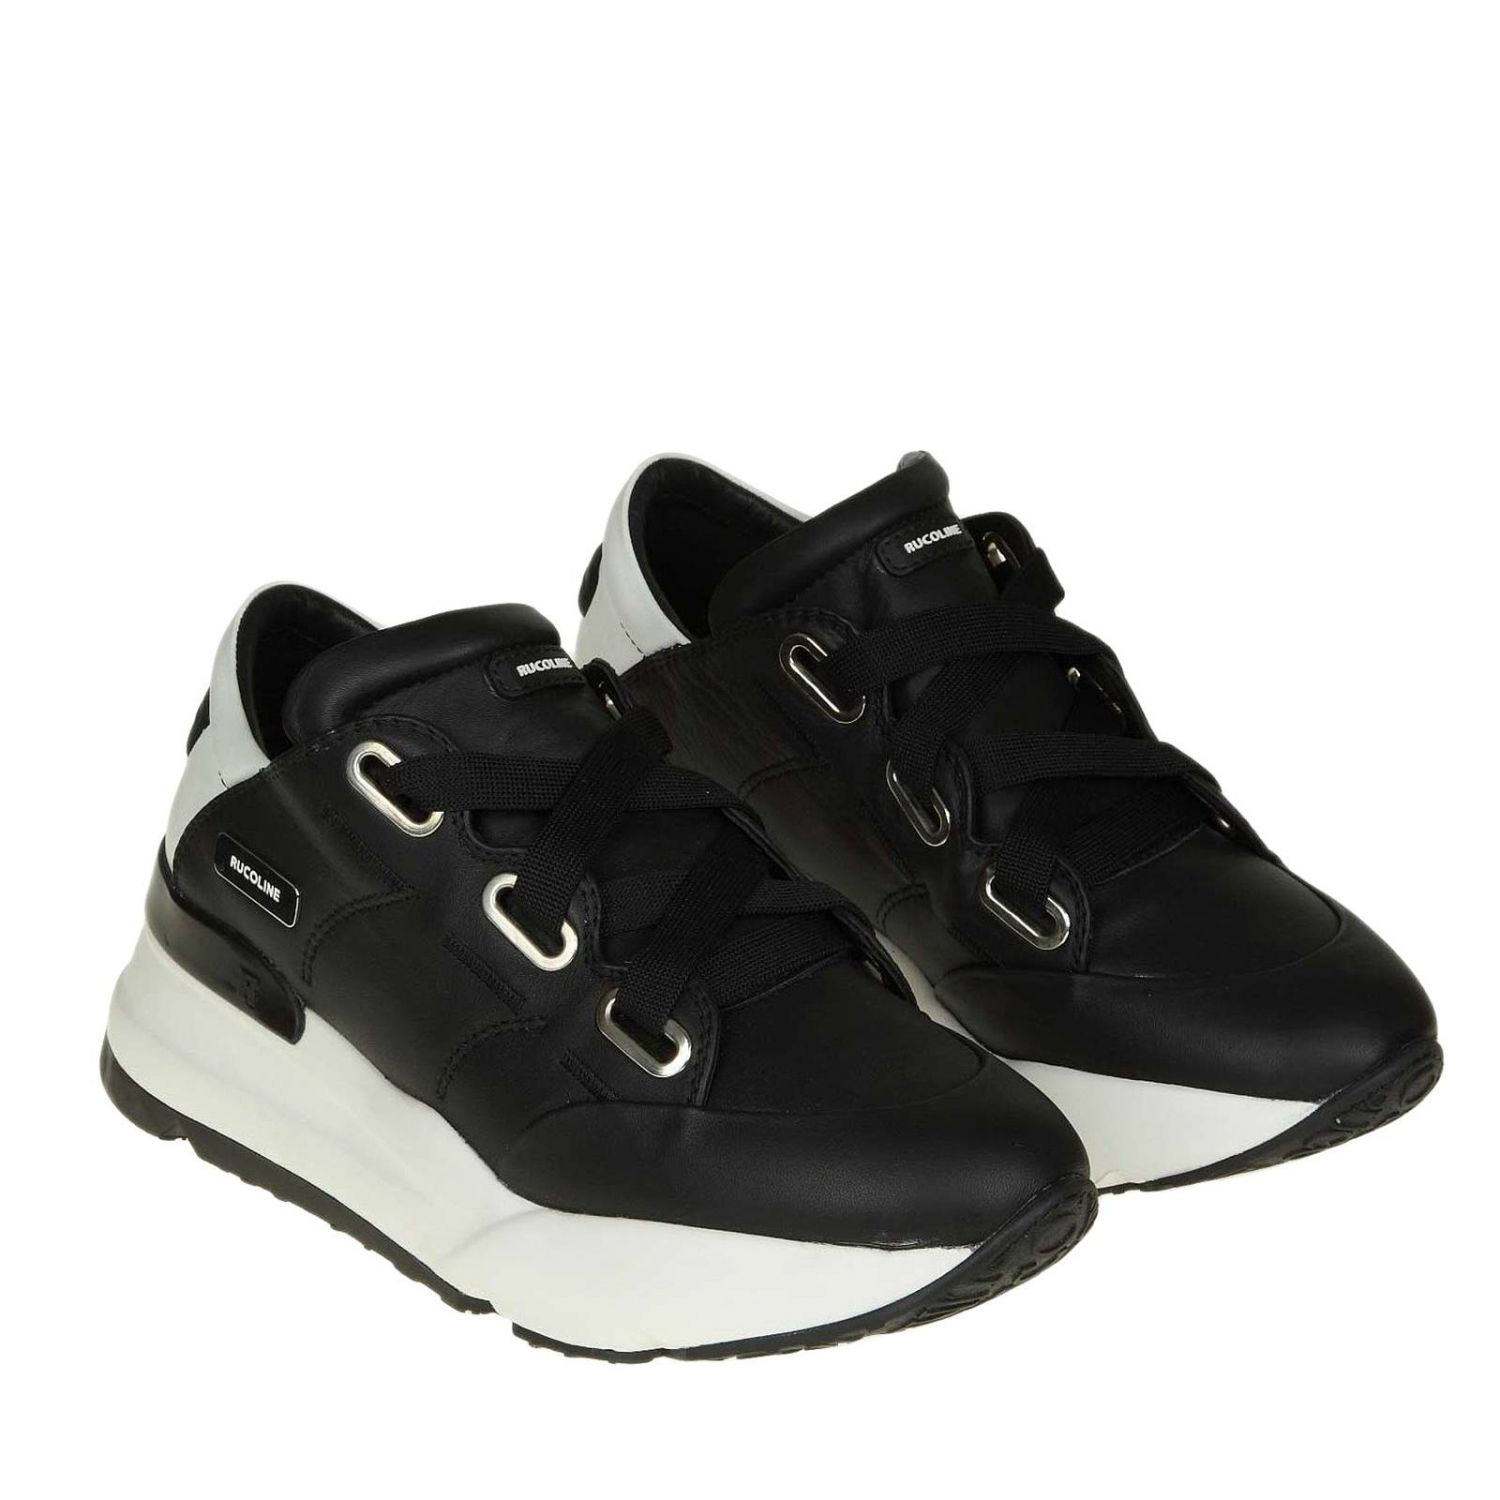 Rucoline Outlet: sneakers for women - Black | Rucoline sneakers 4038 ...